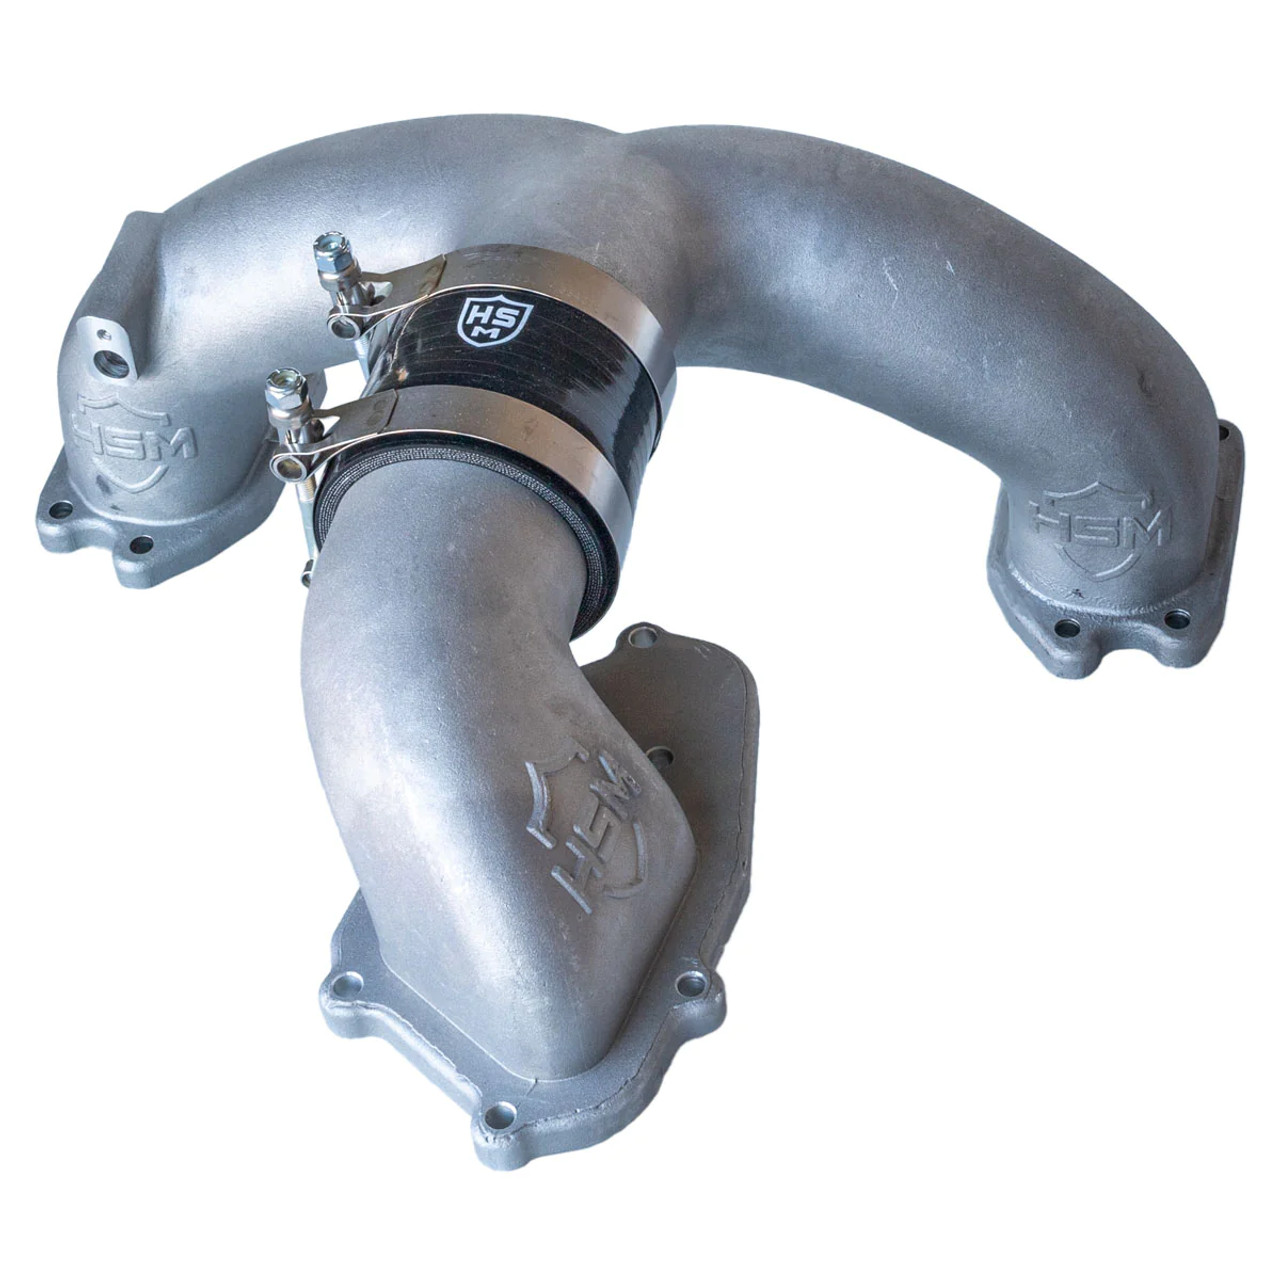 HSM Intake Manifold Upgrade for 2011 to 2019 Ford 6.7L Powerstroke-Main View